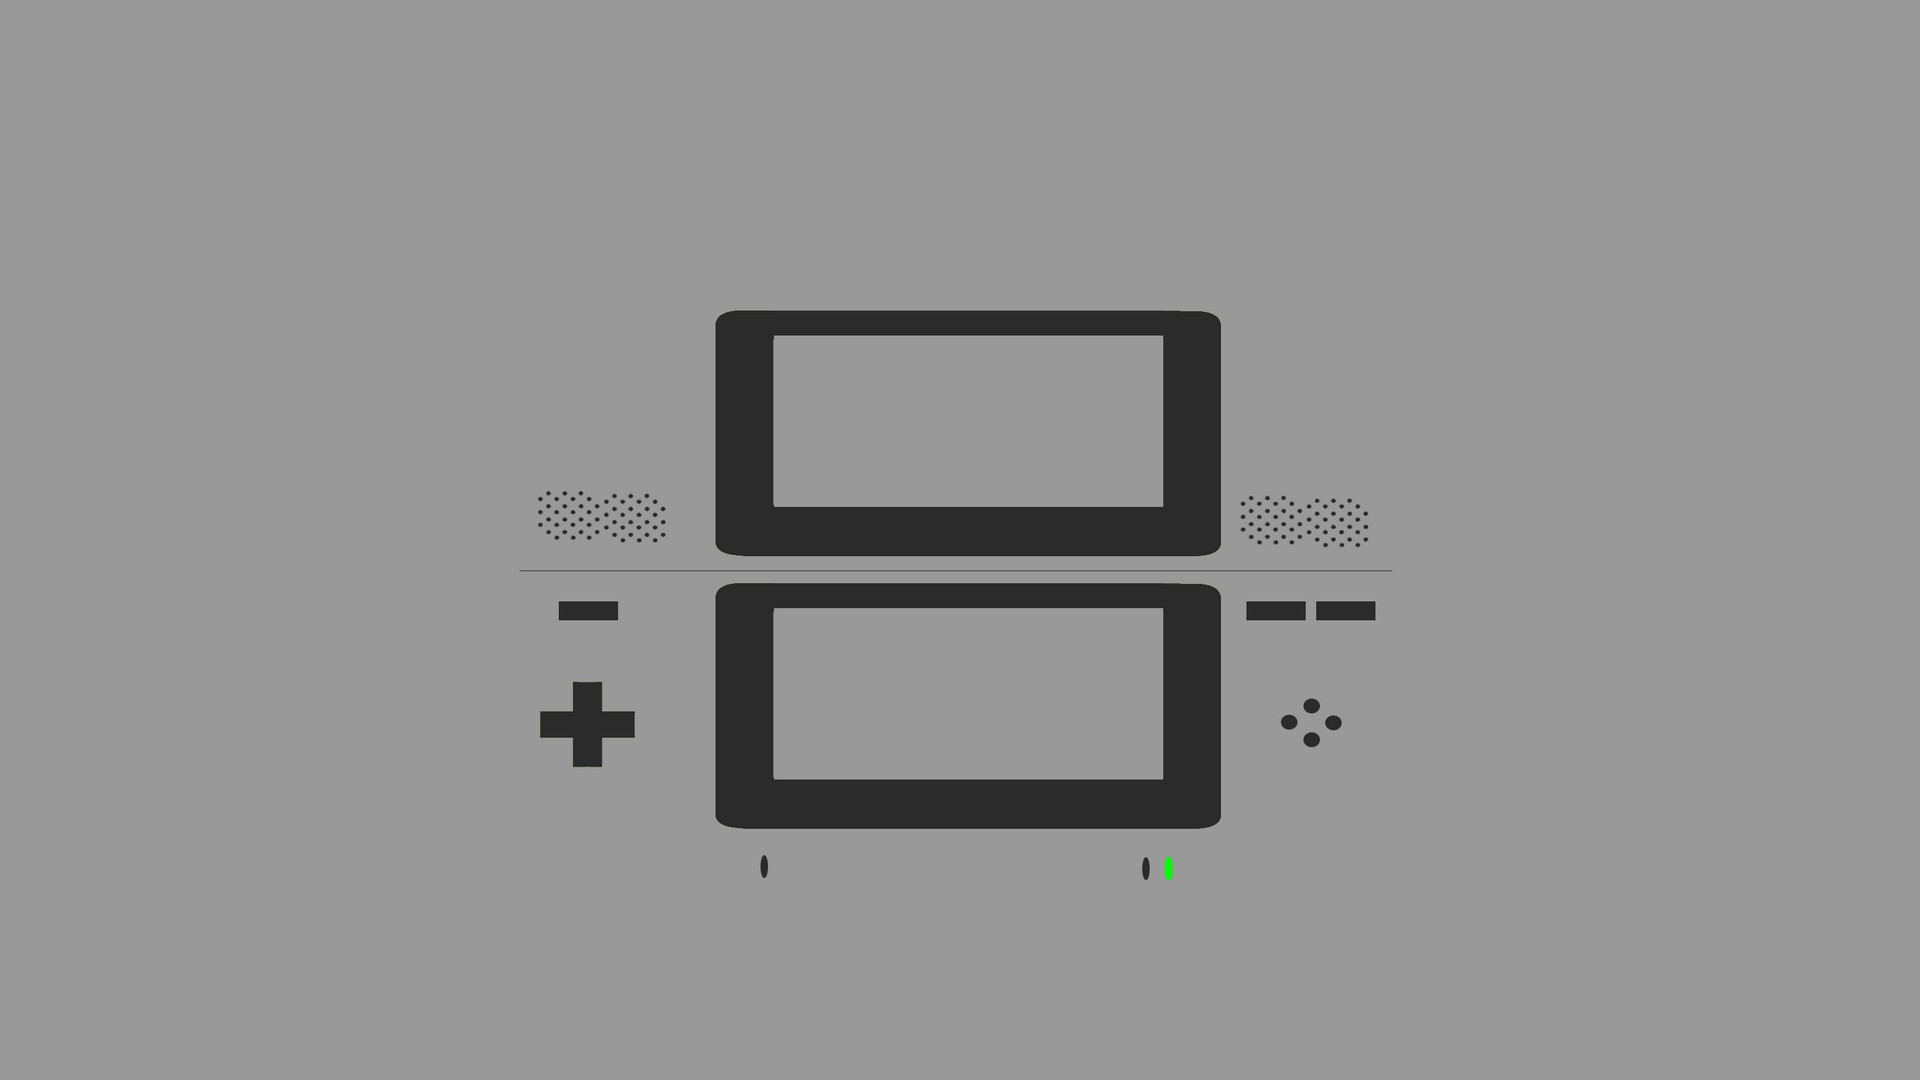 General 1920x1080 minimalism video games consoles gray gray background Nintendo simple background Nintendo DS